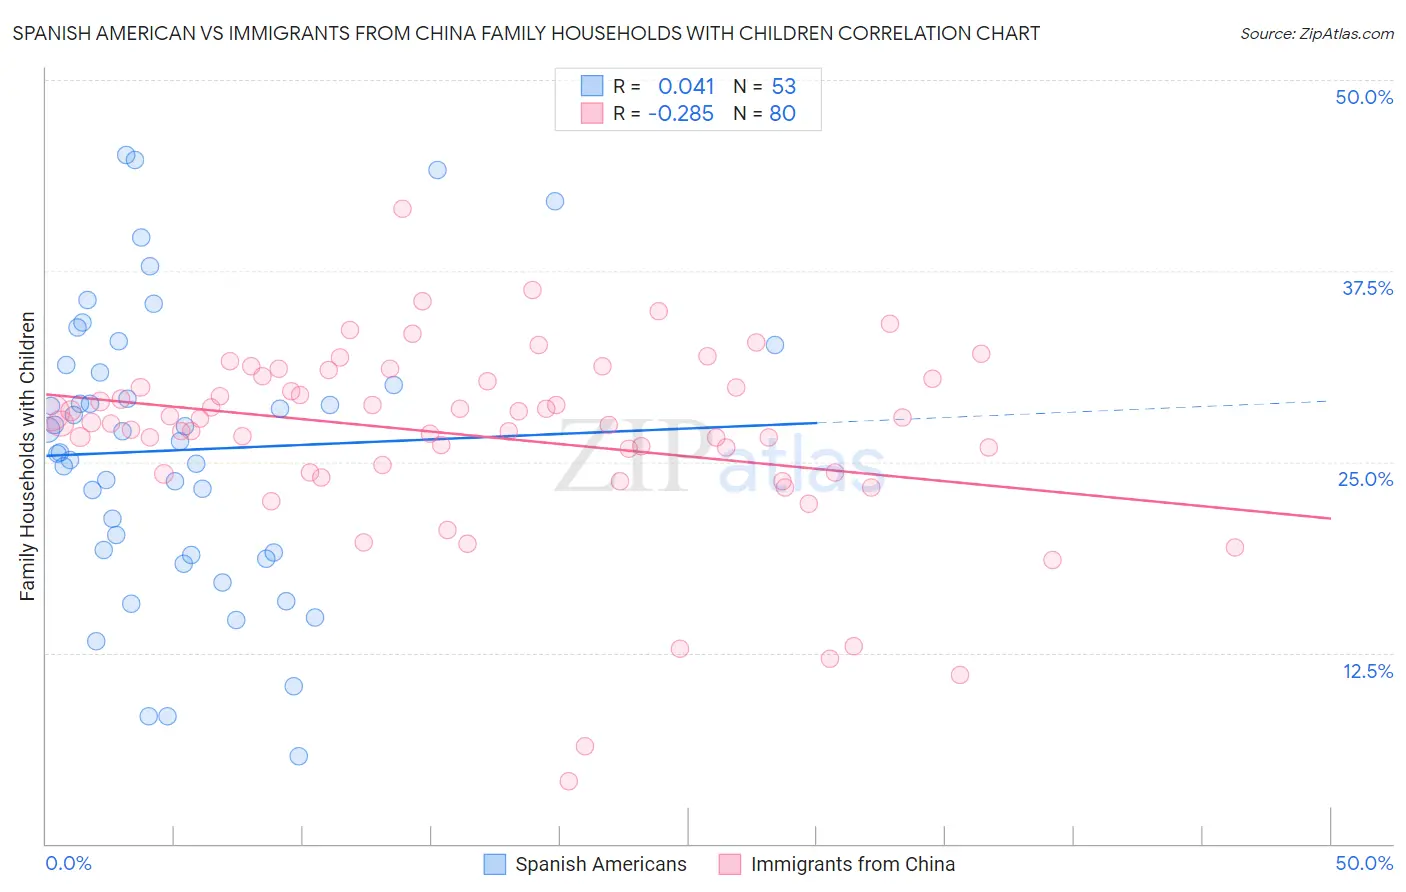 Spanish American vs Immigrants from China Family Households with Children